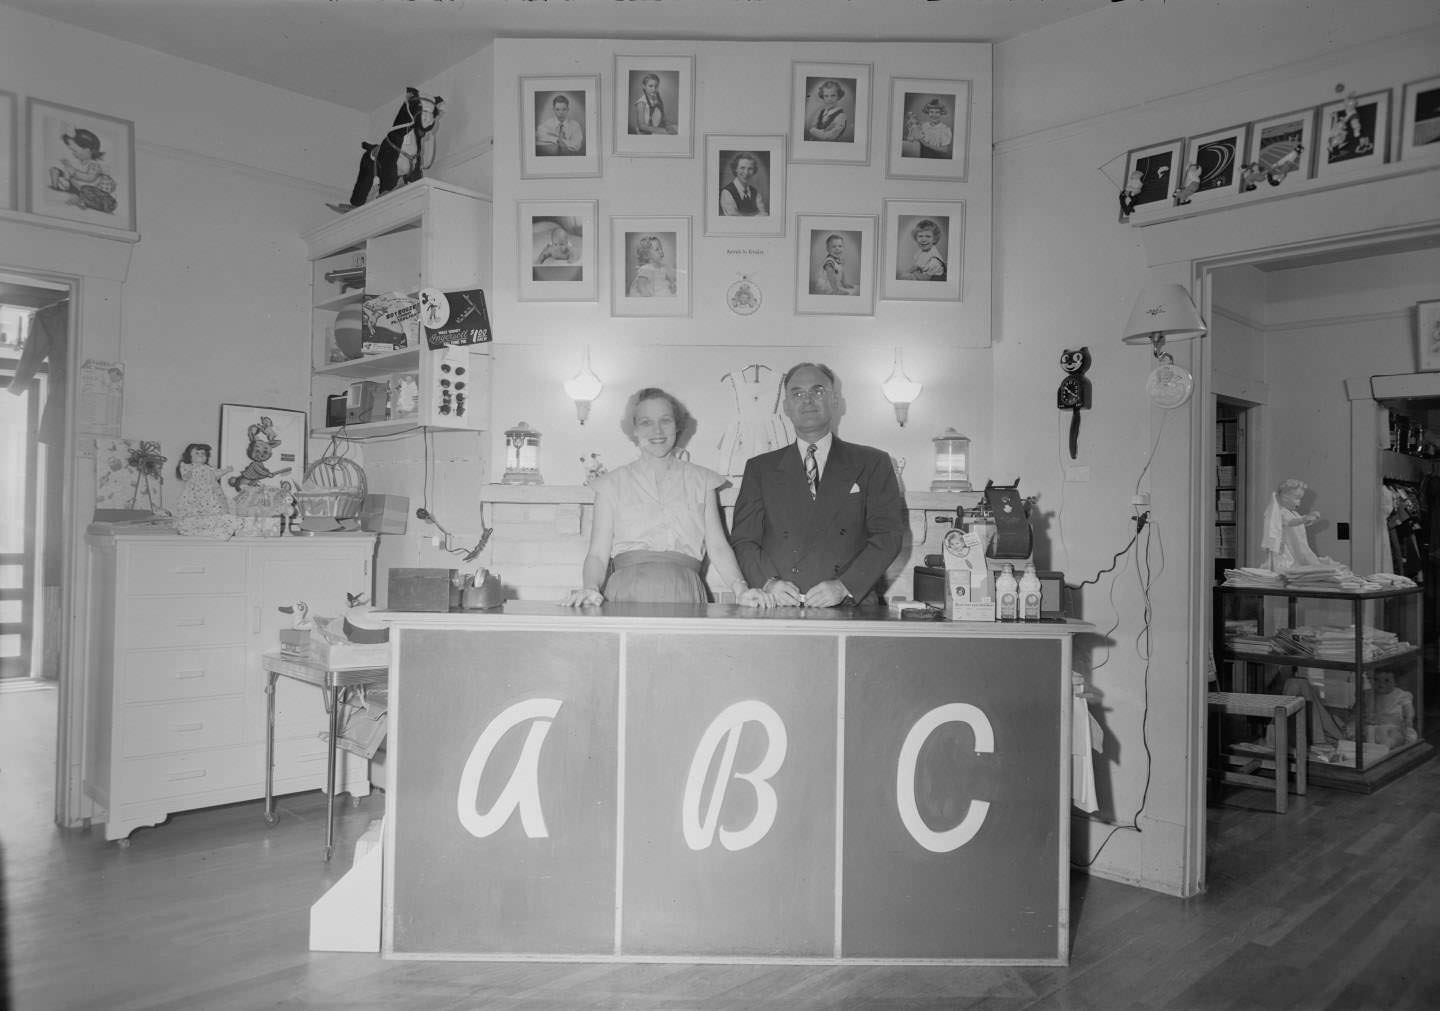 Eve Marie Martin and George Martin stand behind the counter in the ABC shop, located at 809 W. 12th St. in Austin, 1951